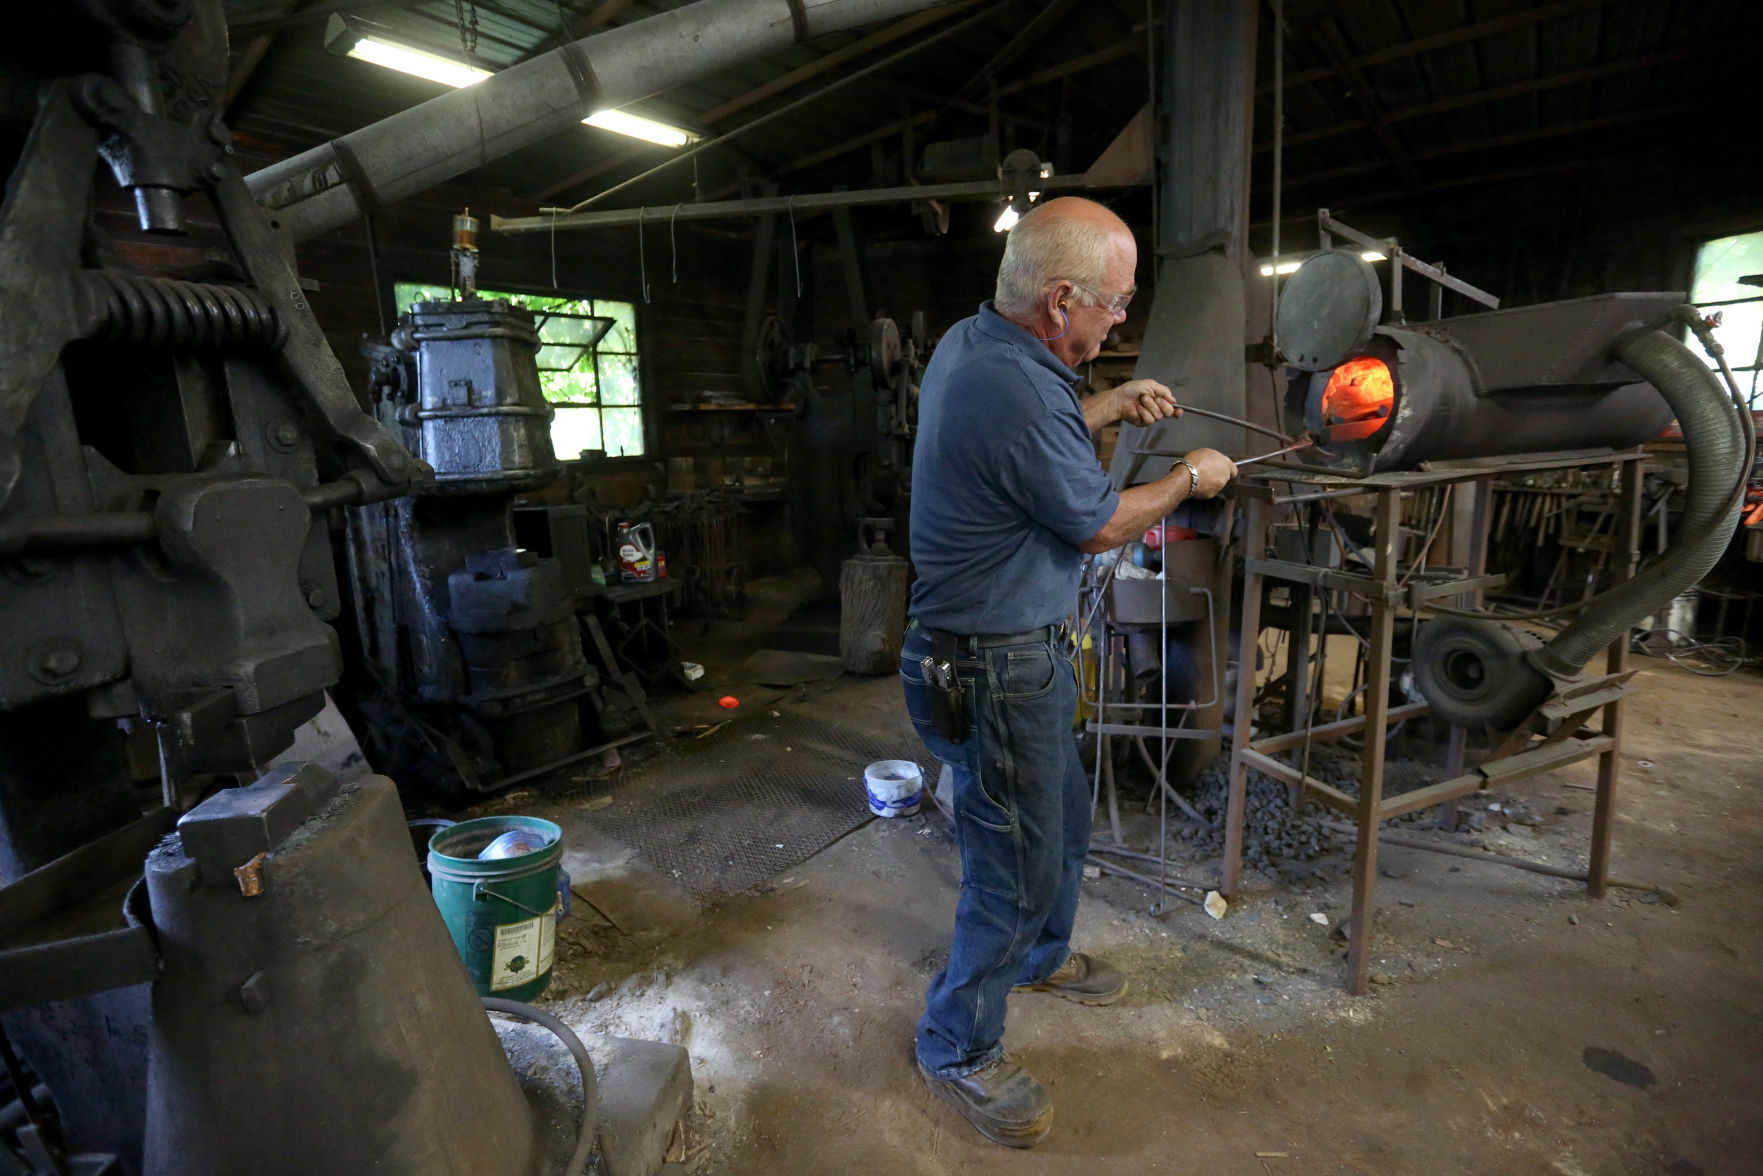 Ted Schuster works with a piece of hot metal at Prairie Forge in Hopkinton, Iowa, on Monday, July 22, 2019.    PHOTO CREDIT: JESSICA REILLY